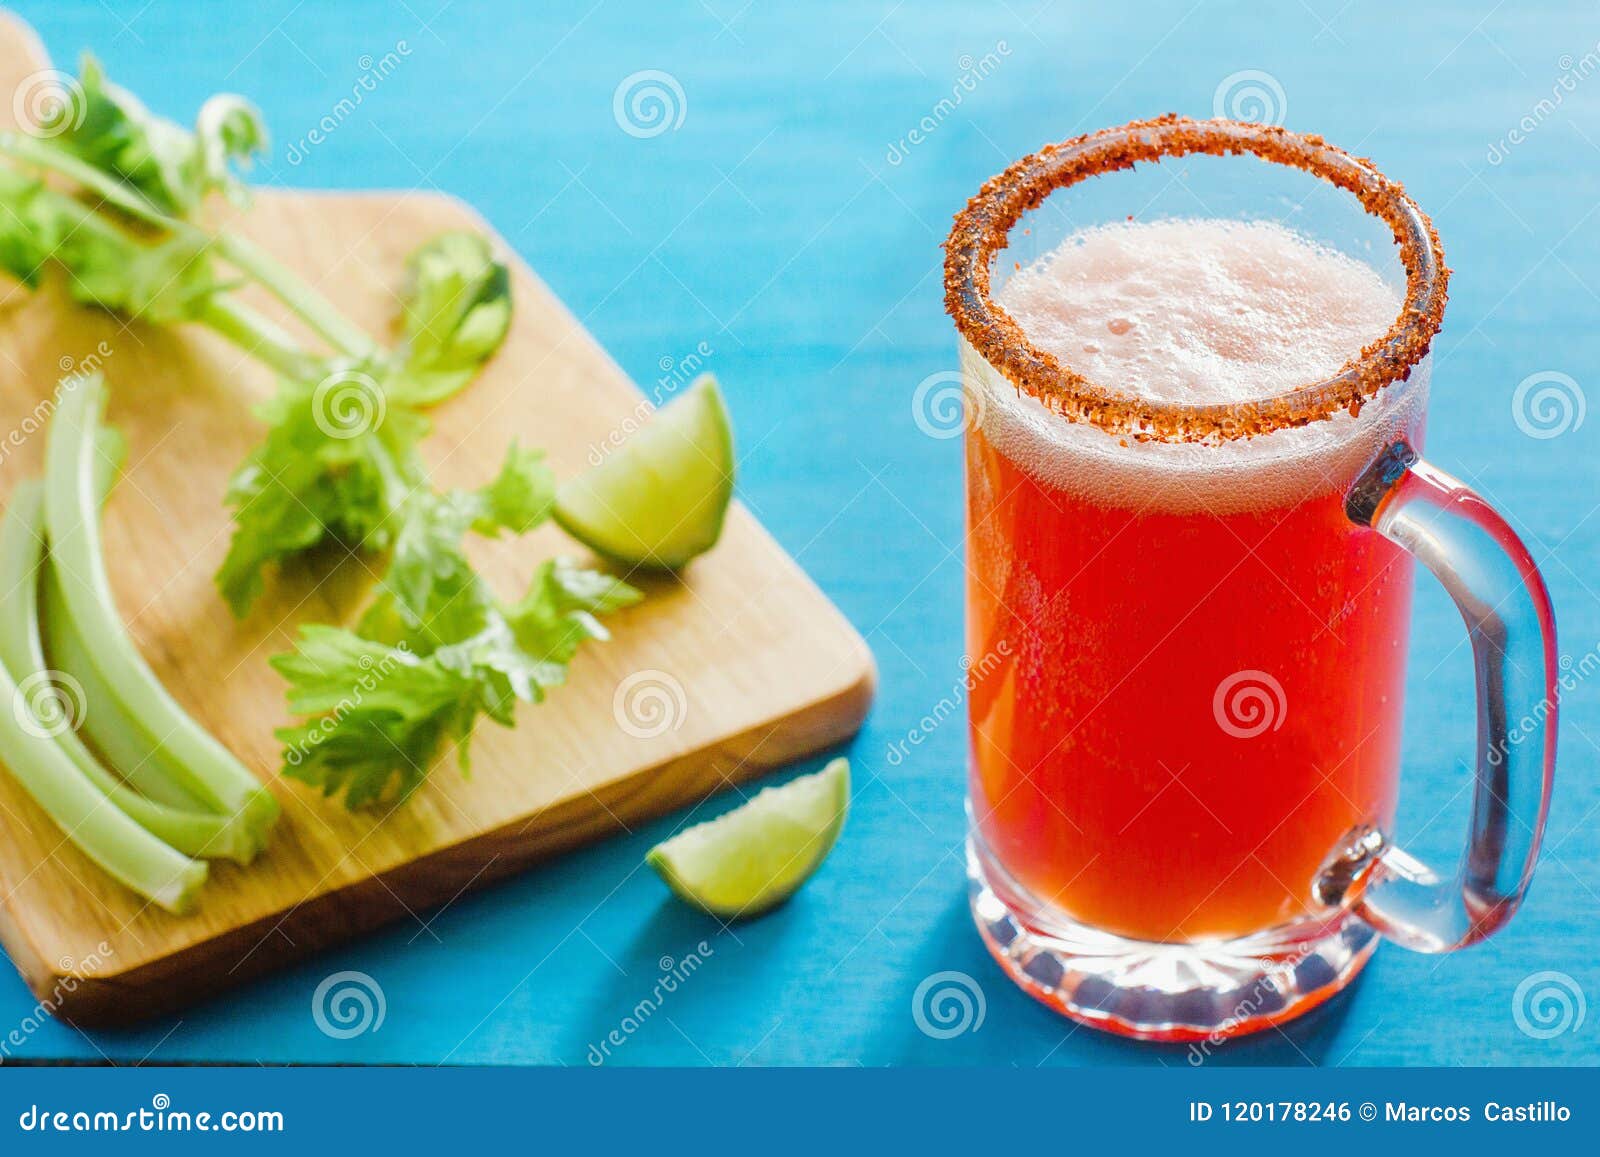 michelada beer with tomato juice, spicy sauce and lemon, mexican drink cocktail in mexico